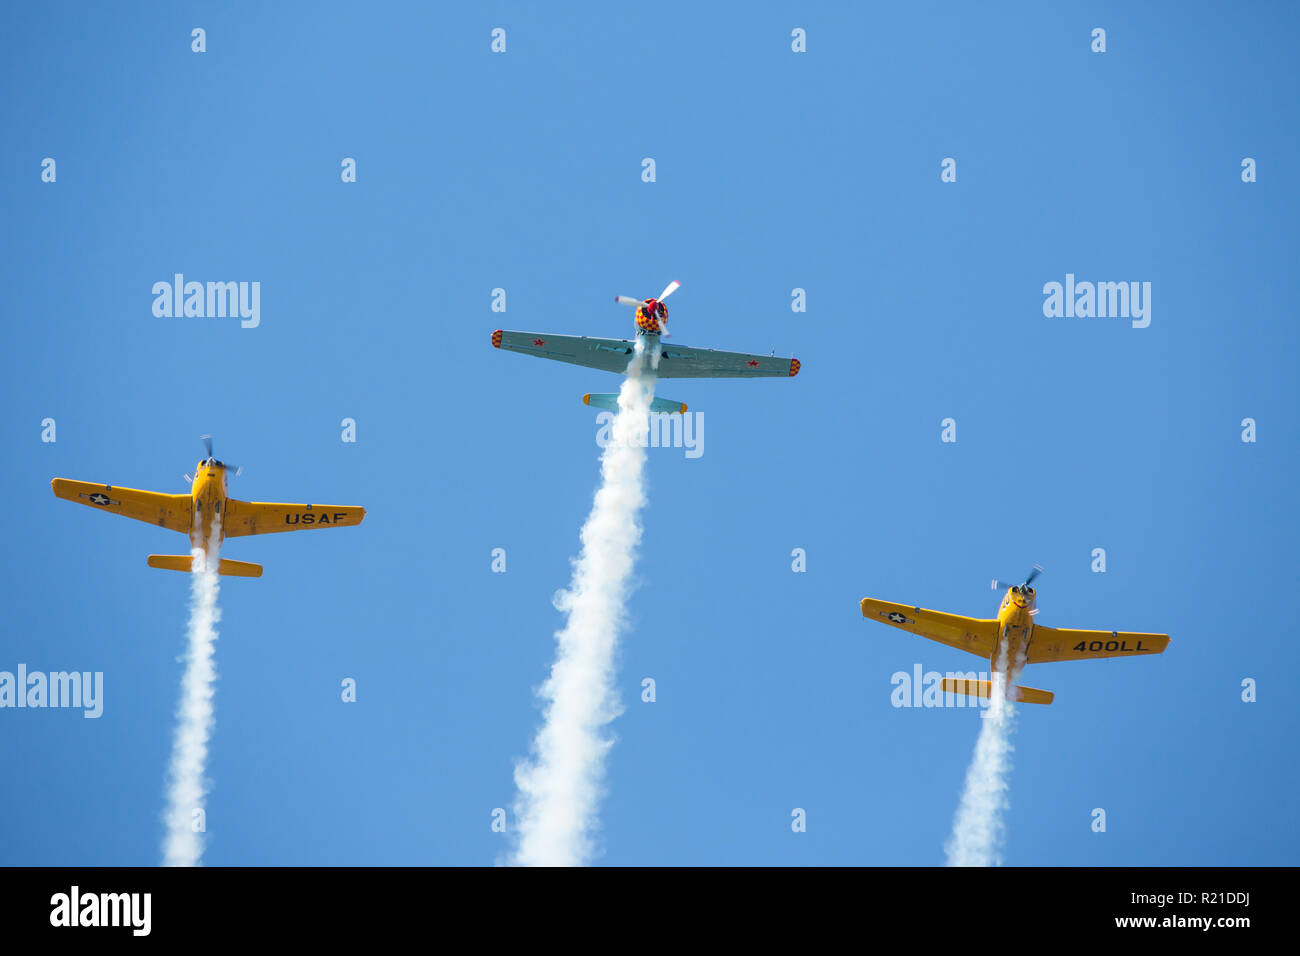 MONROE, NC (USA) - November 10, 2018: Three aerobatic aircraft flying in formation at the Warbirds Over Monroe Air Show. Stock Photo